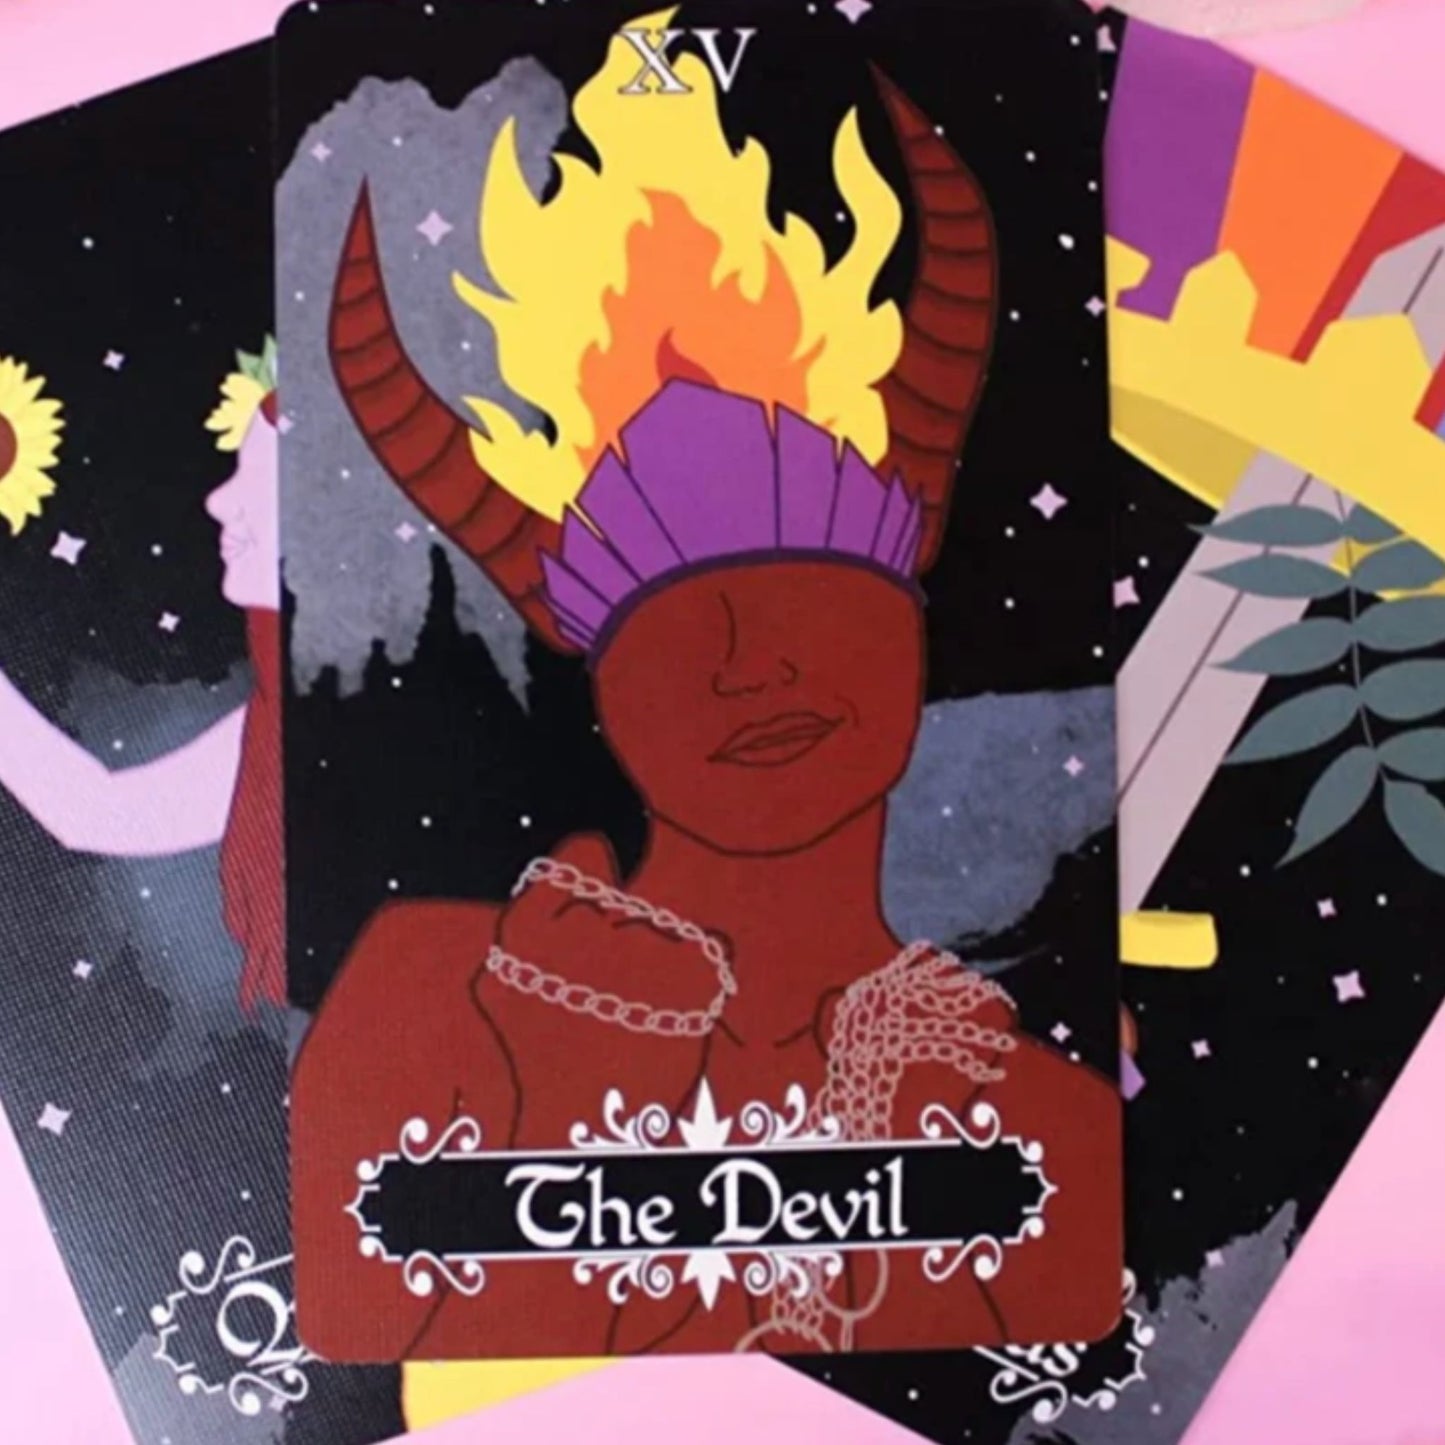 The Cosmic Coven Tarot Card Deck